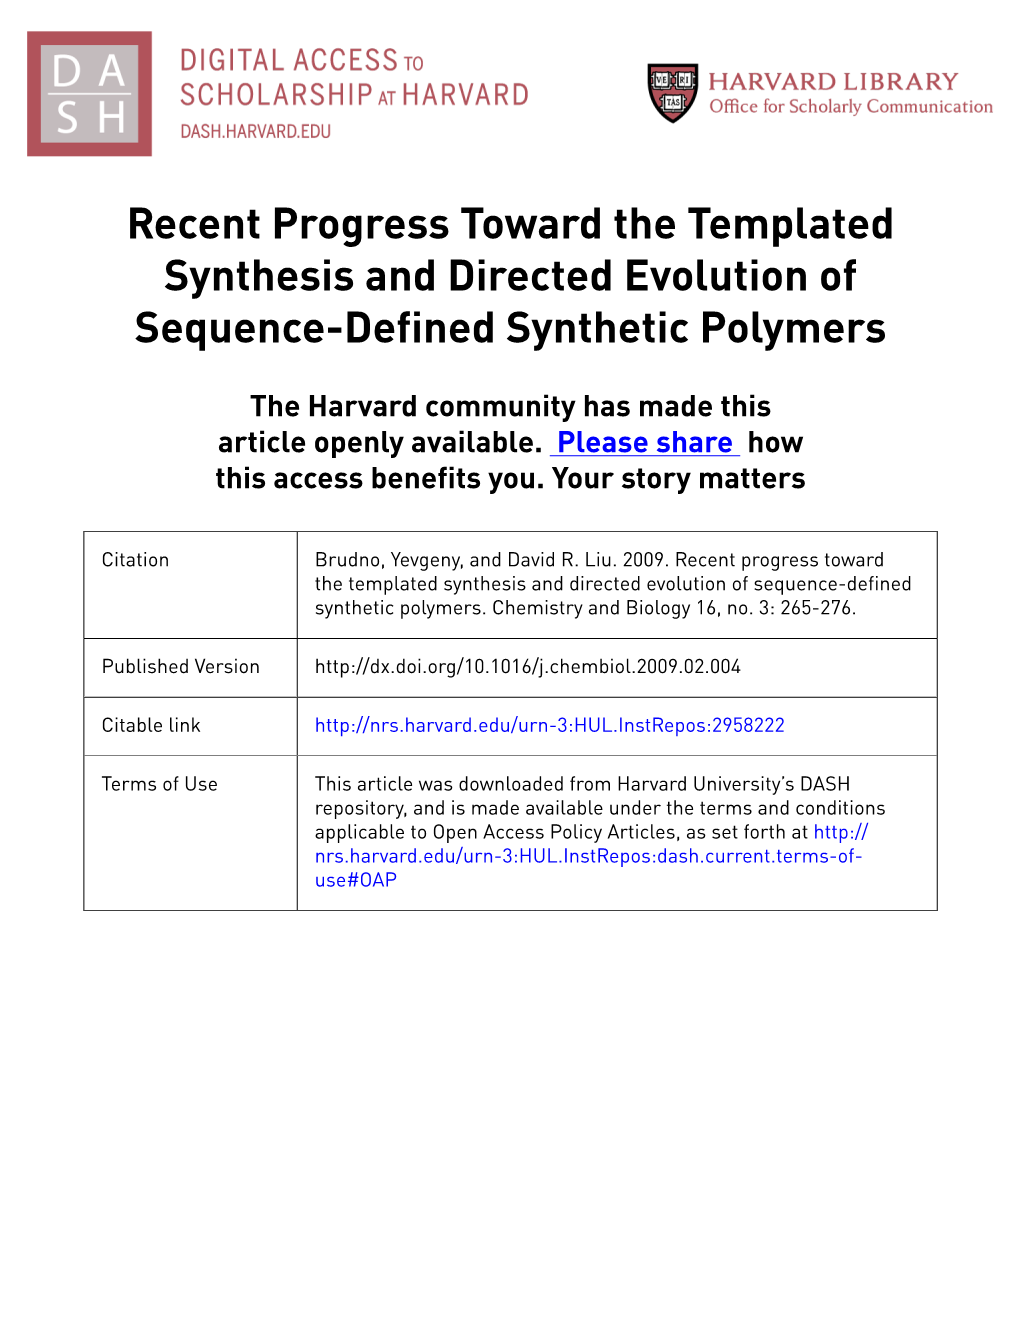 Recent Progress Toward the Templated Synthesis and Directed Evolution of Sequence-Defined Synthetic Polymers